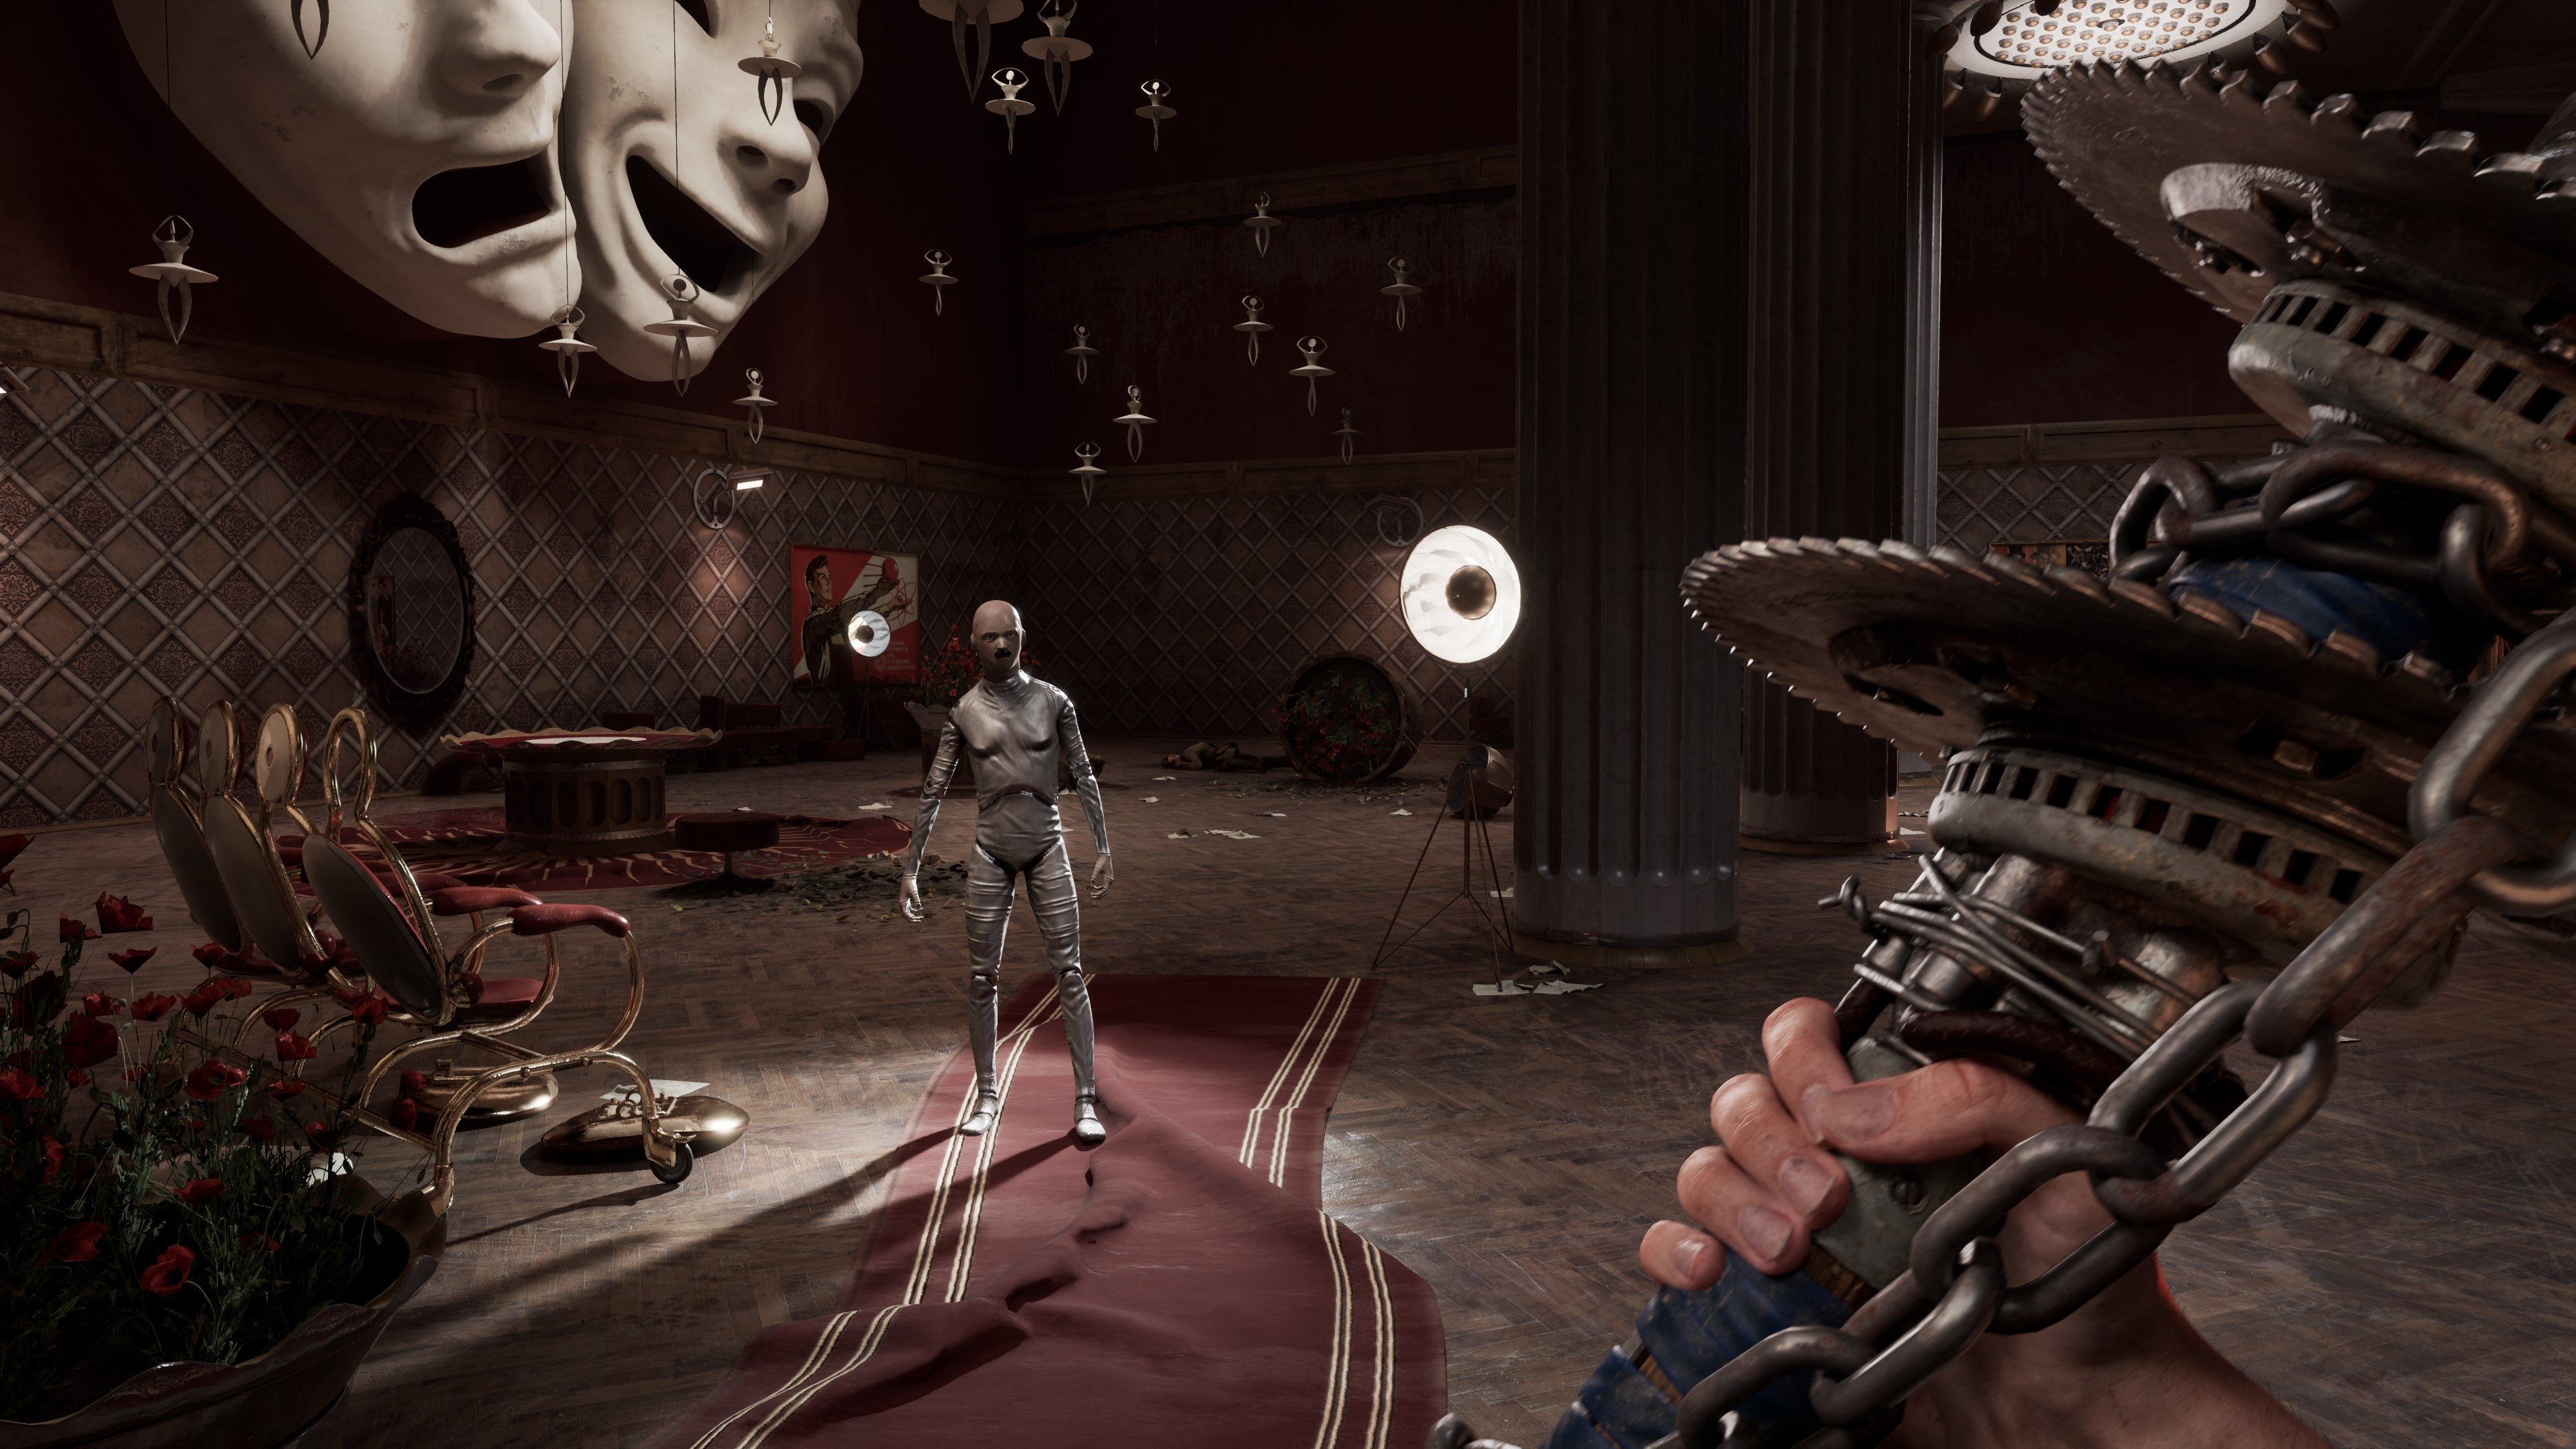 A screenshot from Atomic Heart which shows the player confront a hostile android with a makeshift saw/club weapon.